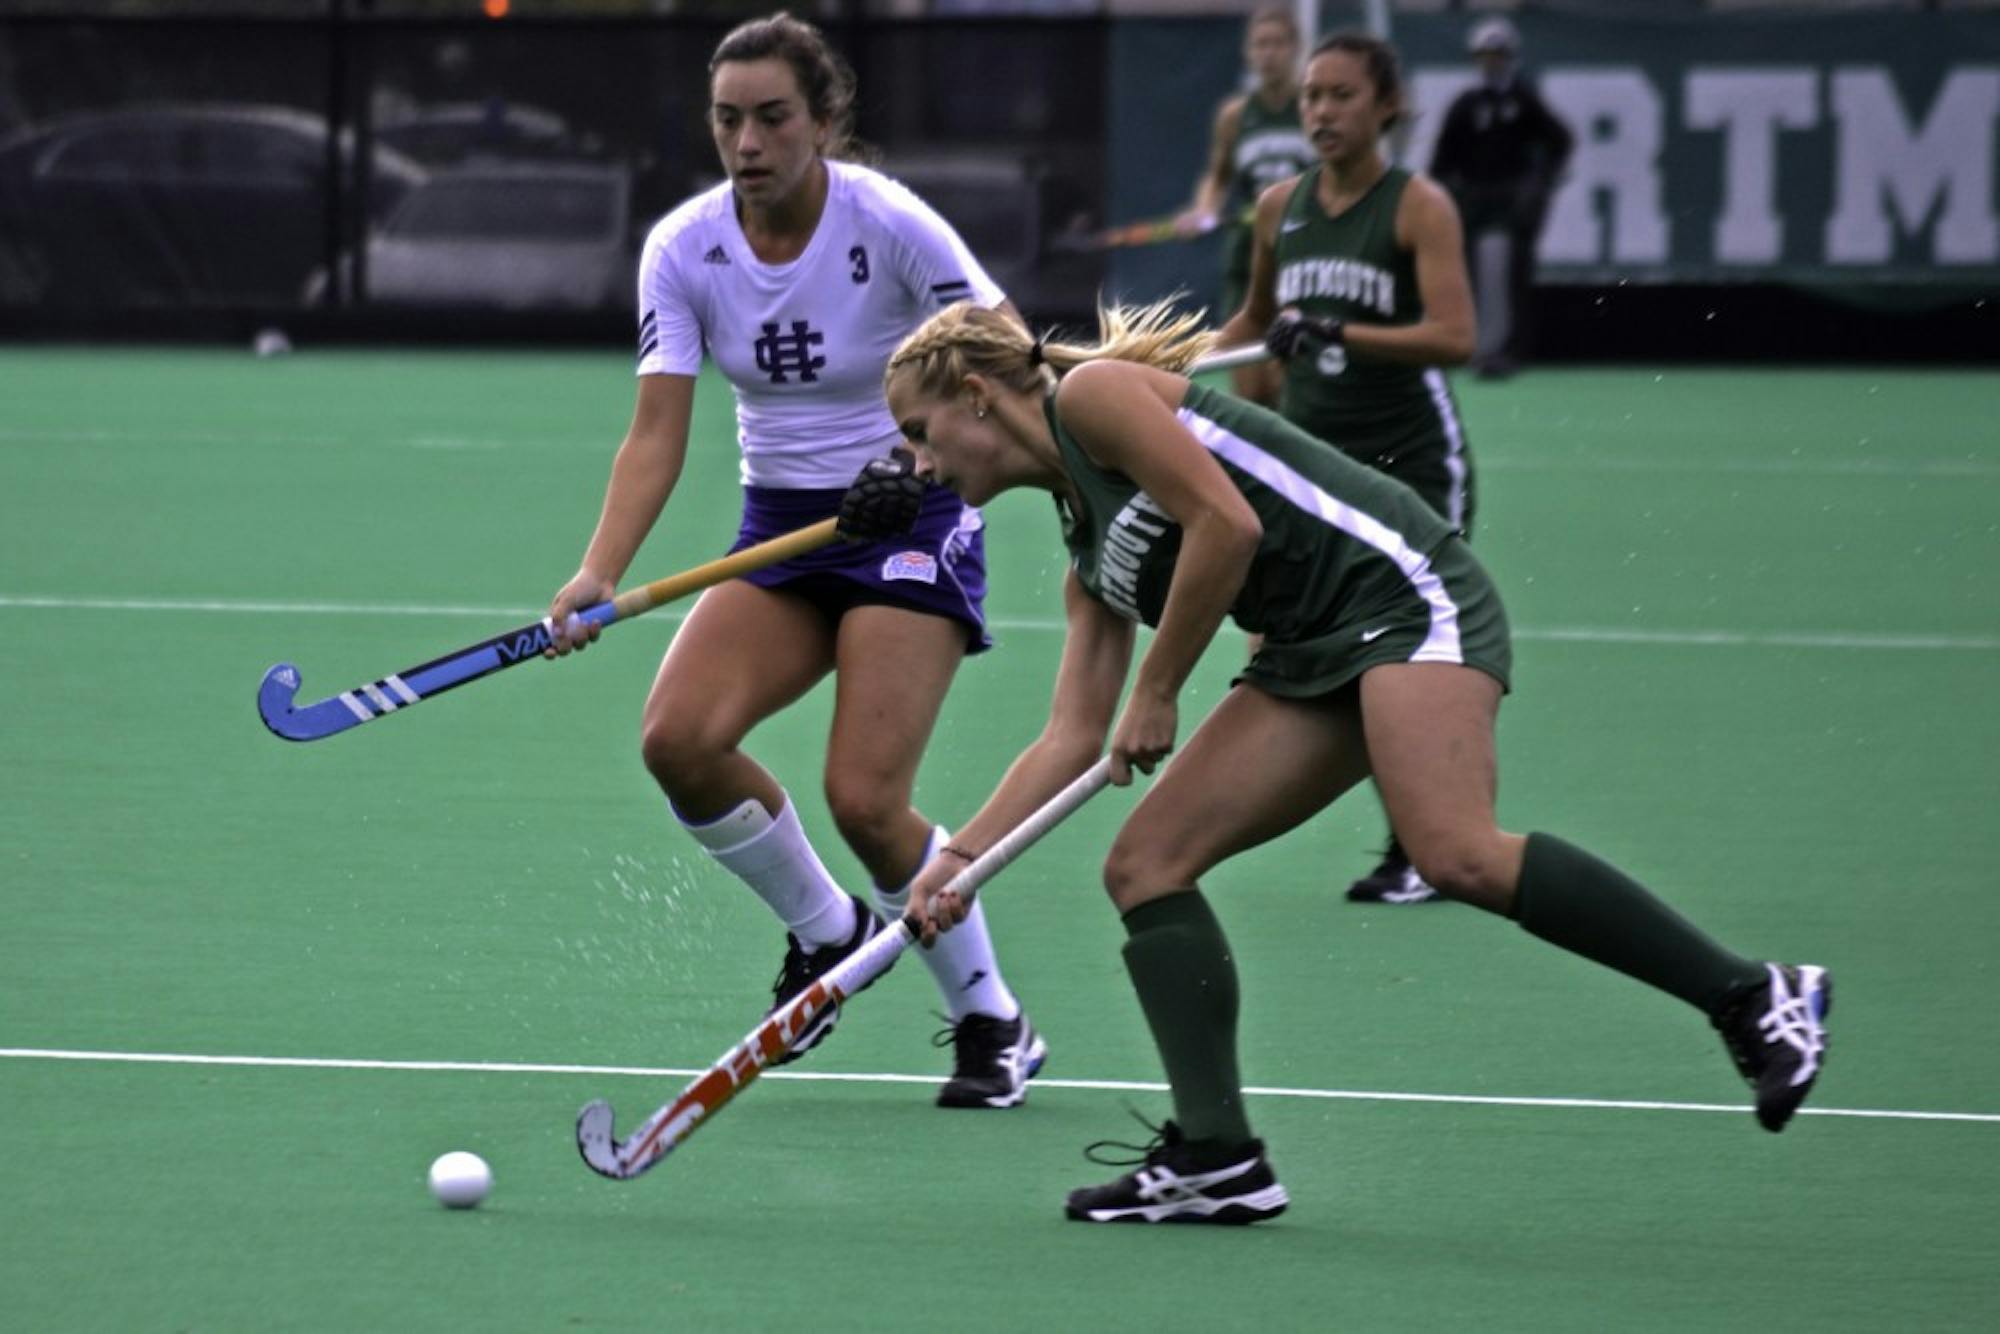 The field hockey team has posted a 1-4 record since a 5-4 OT win over Holy Cross Homecoming Weekend.